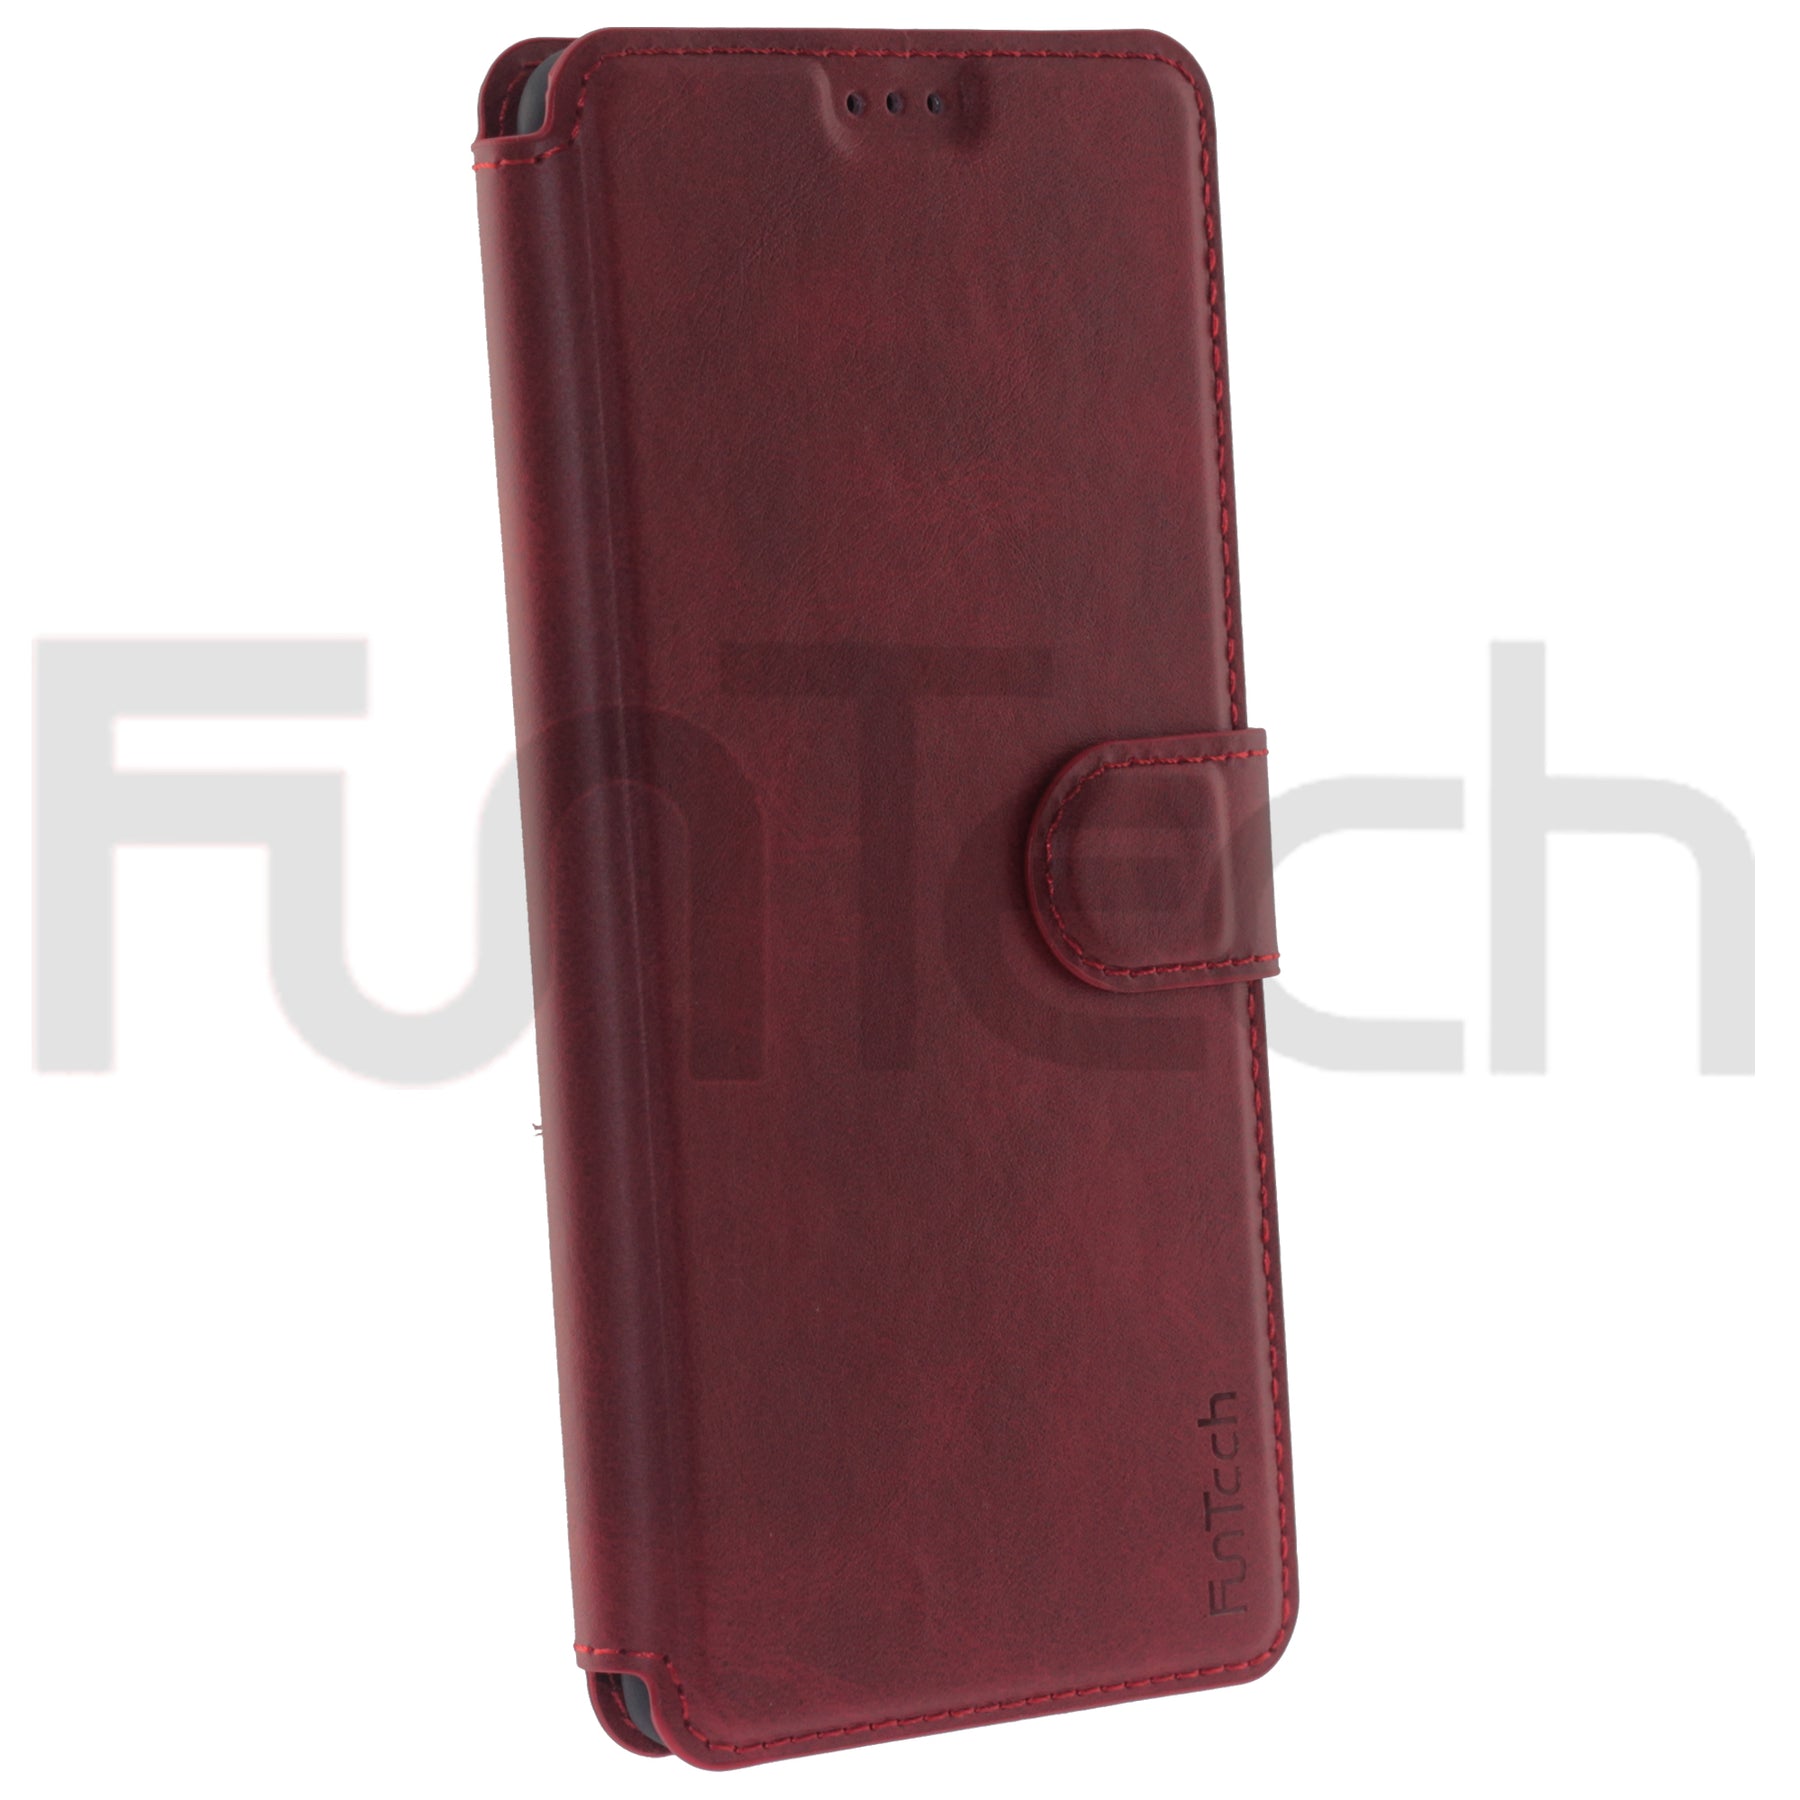 Samsung S10 5G, Leather Wallet Case, Color Red,